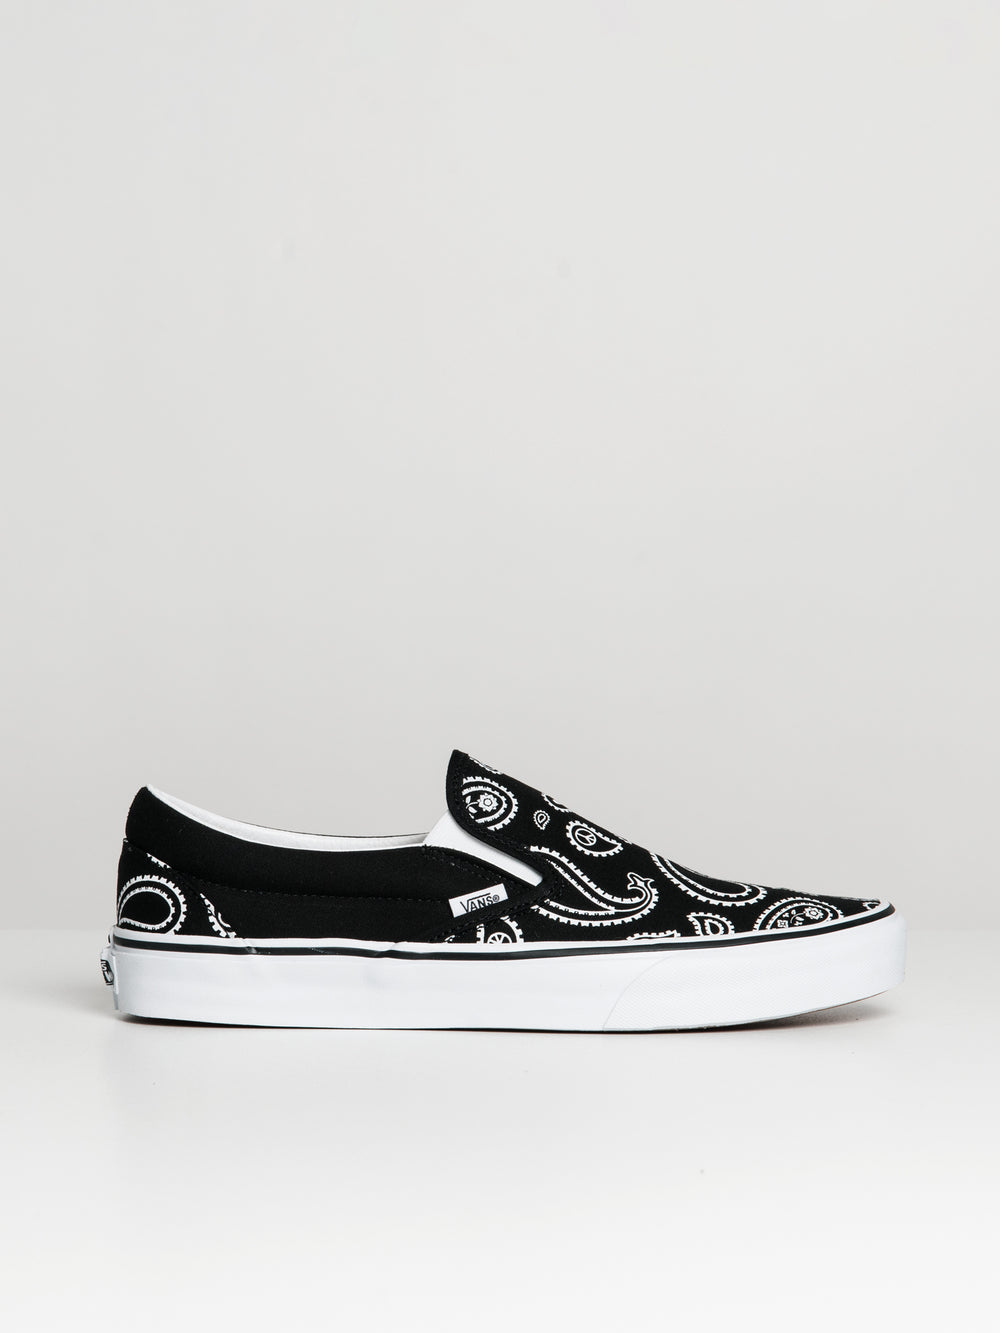 MENS VANS CLASSIC SLIP ON PEACE PAISLEY SNEAKER - CLEARANCE